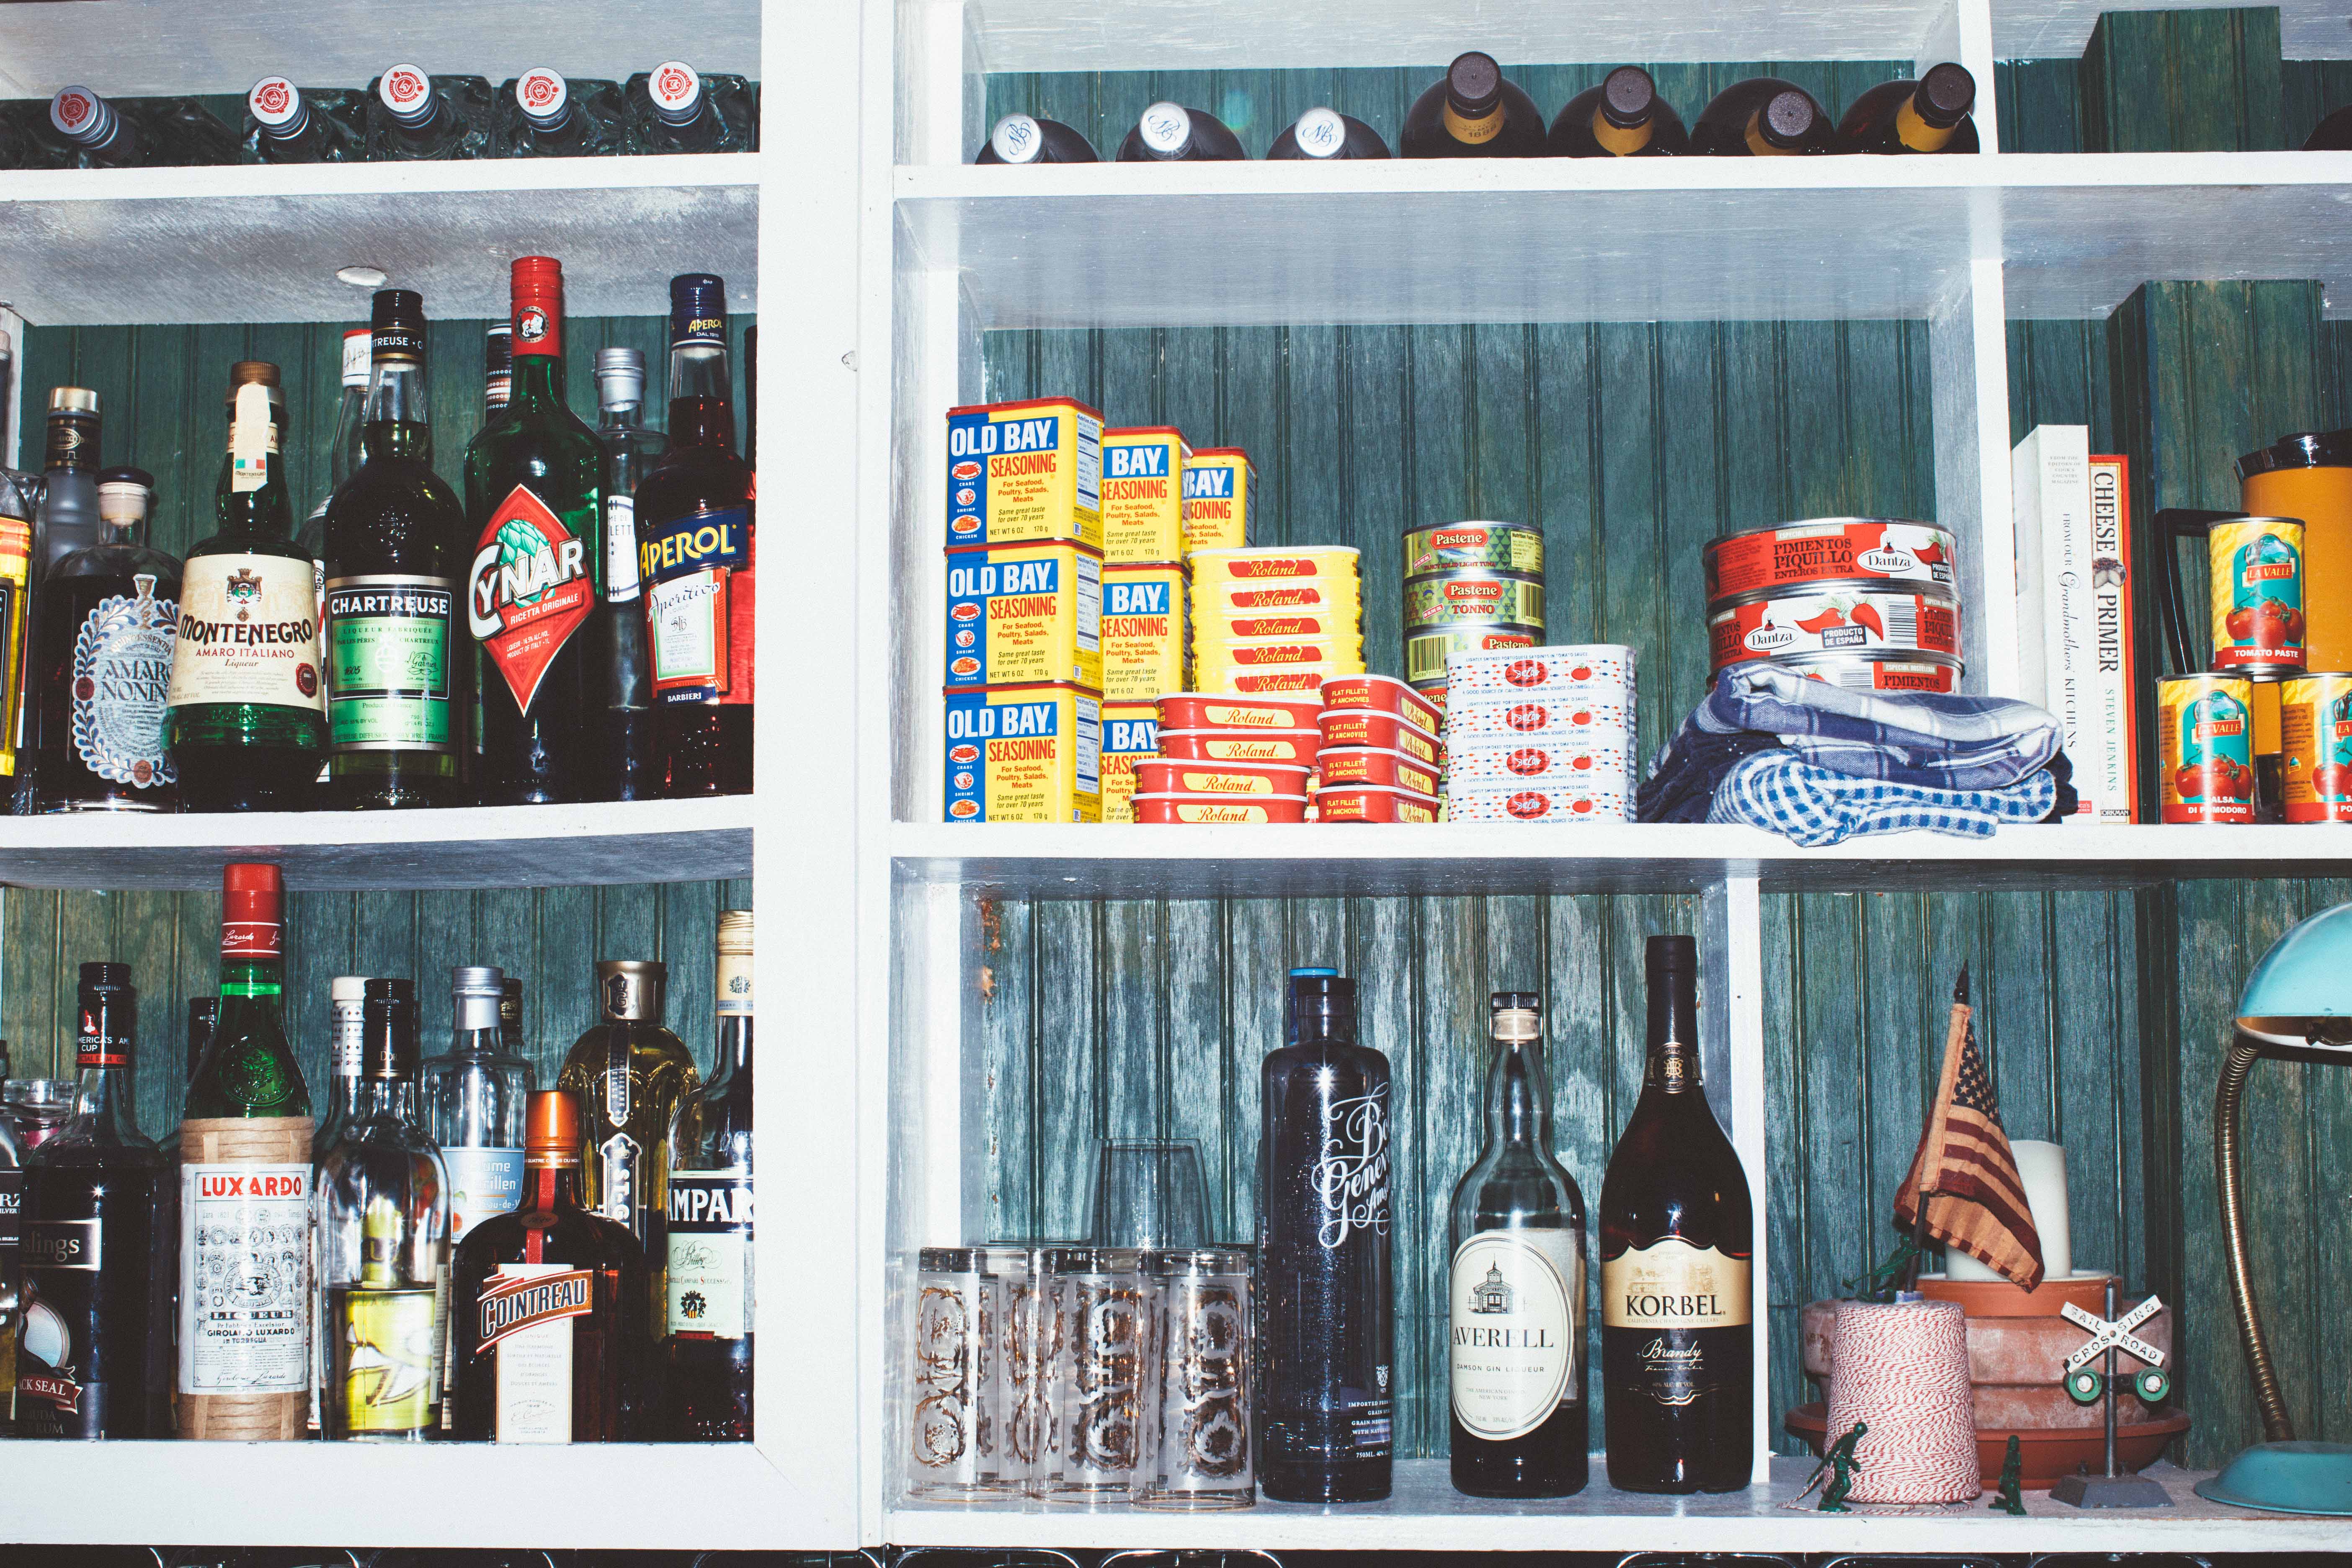 Pantry shelves - How to Stay on Top of Your Small Business Finances